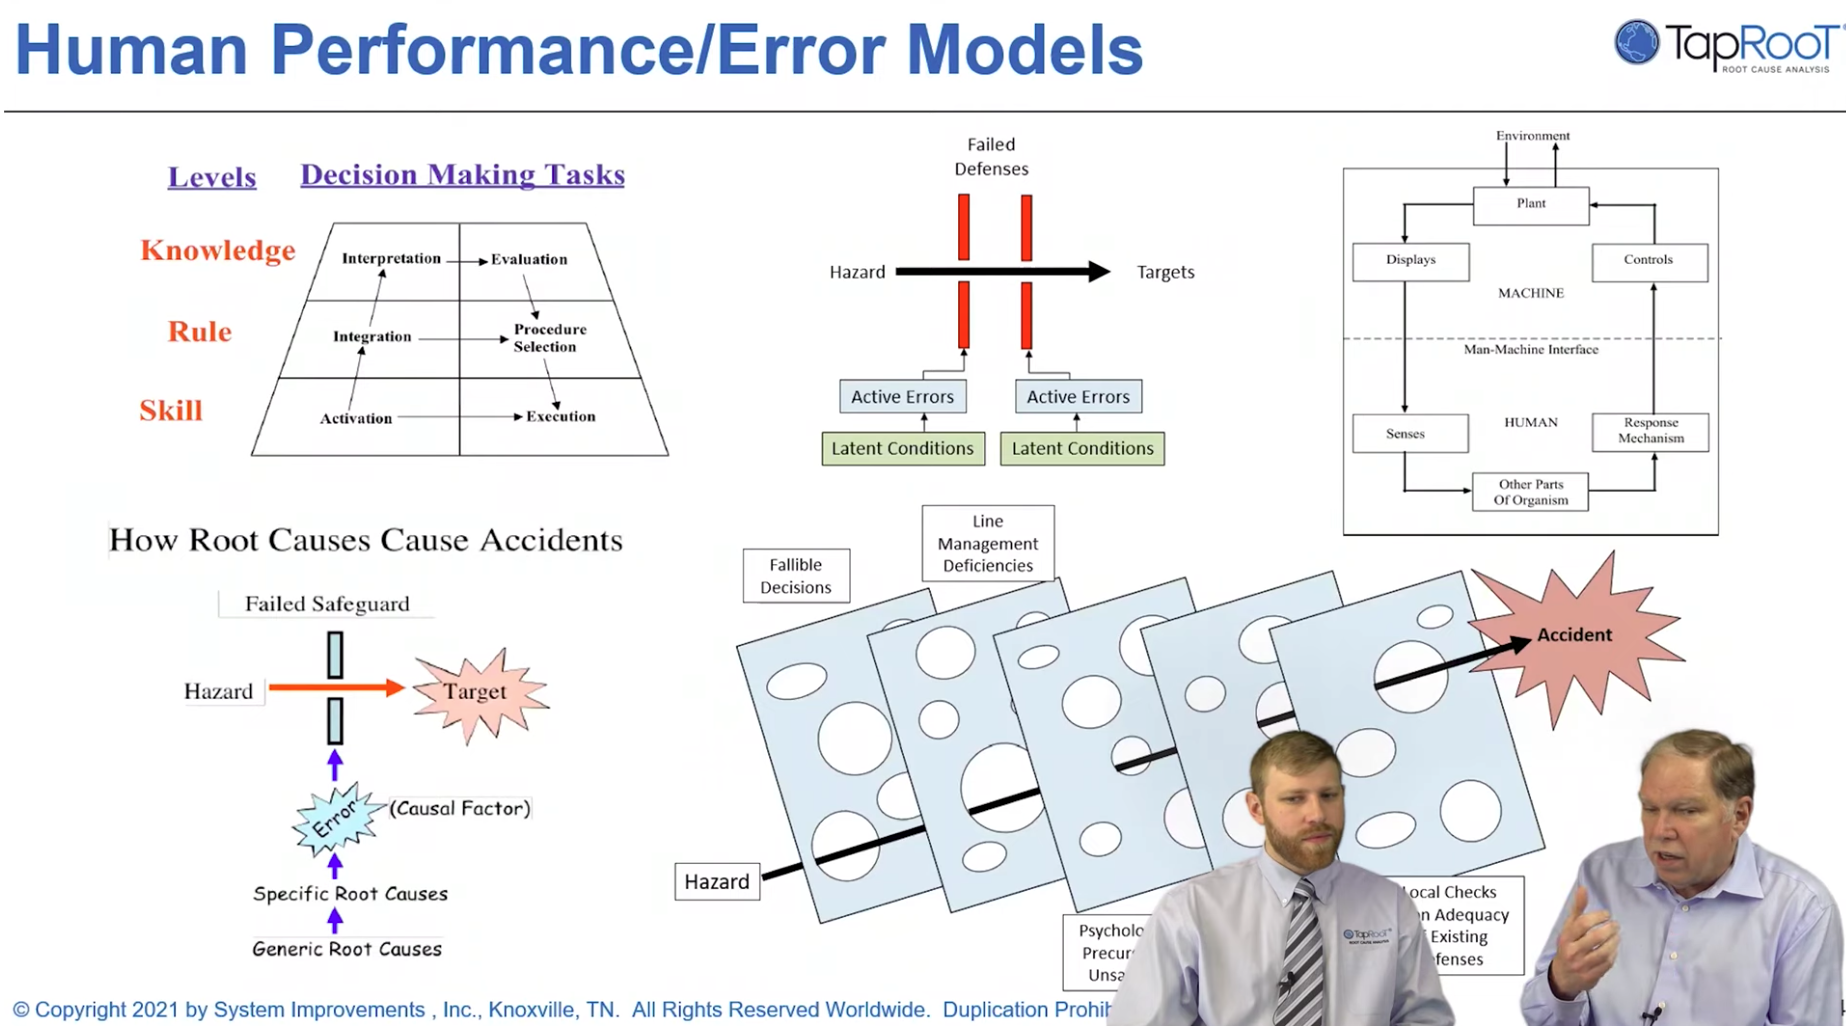 Mark and Alex Discuss the Swiss Cheese Model and Stopping Human Error